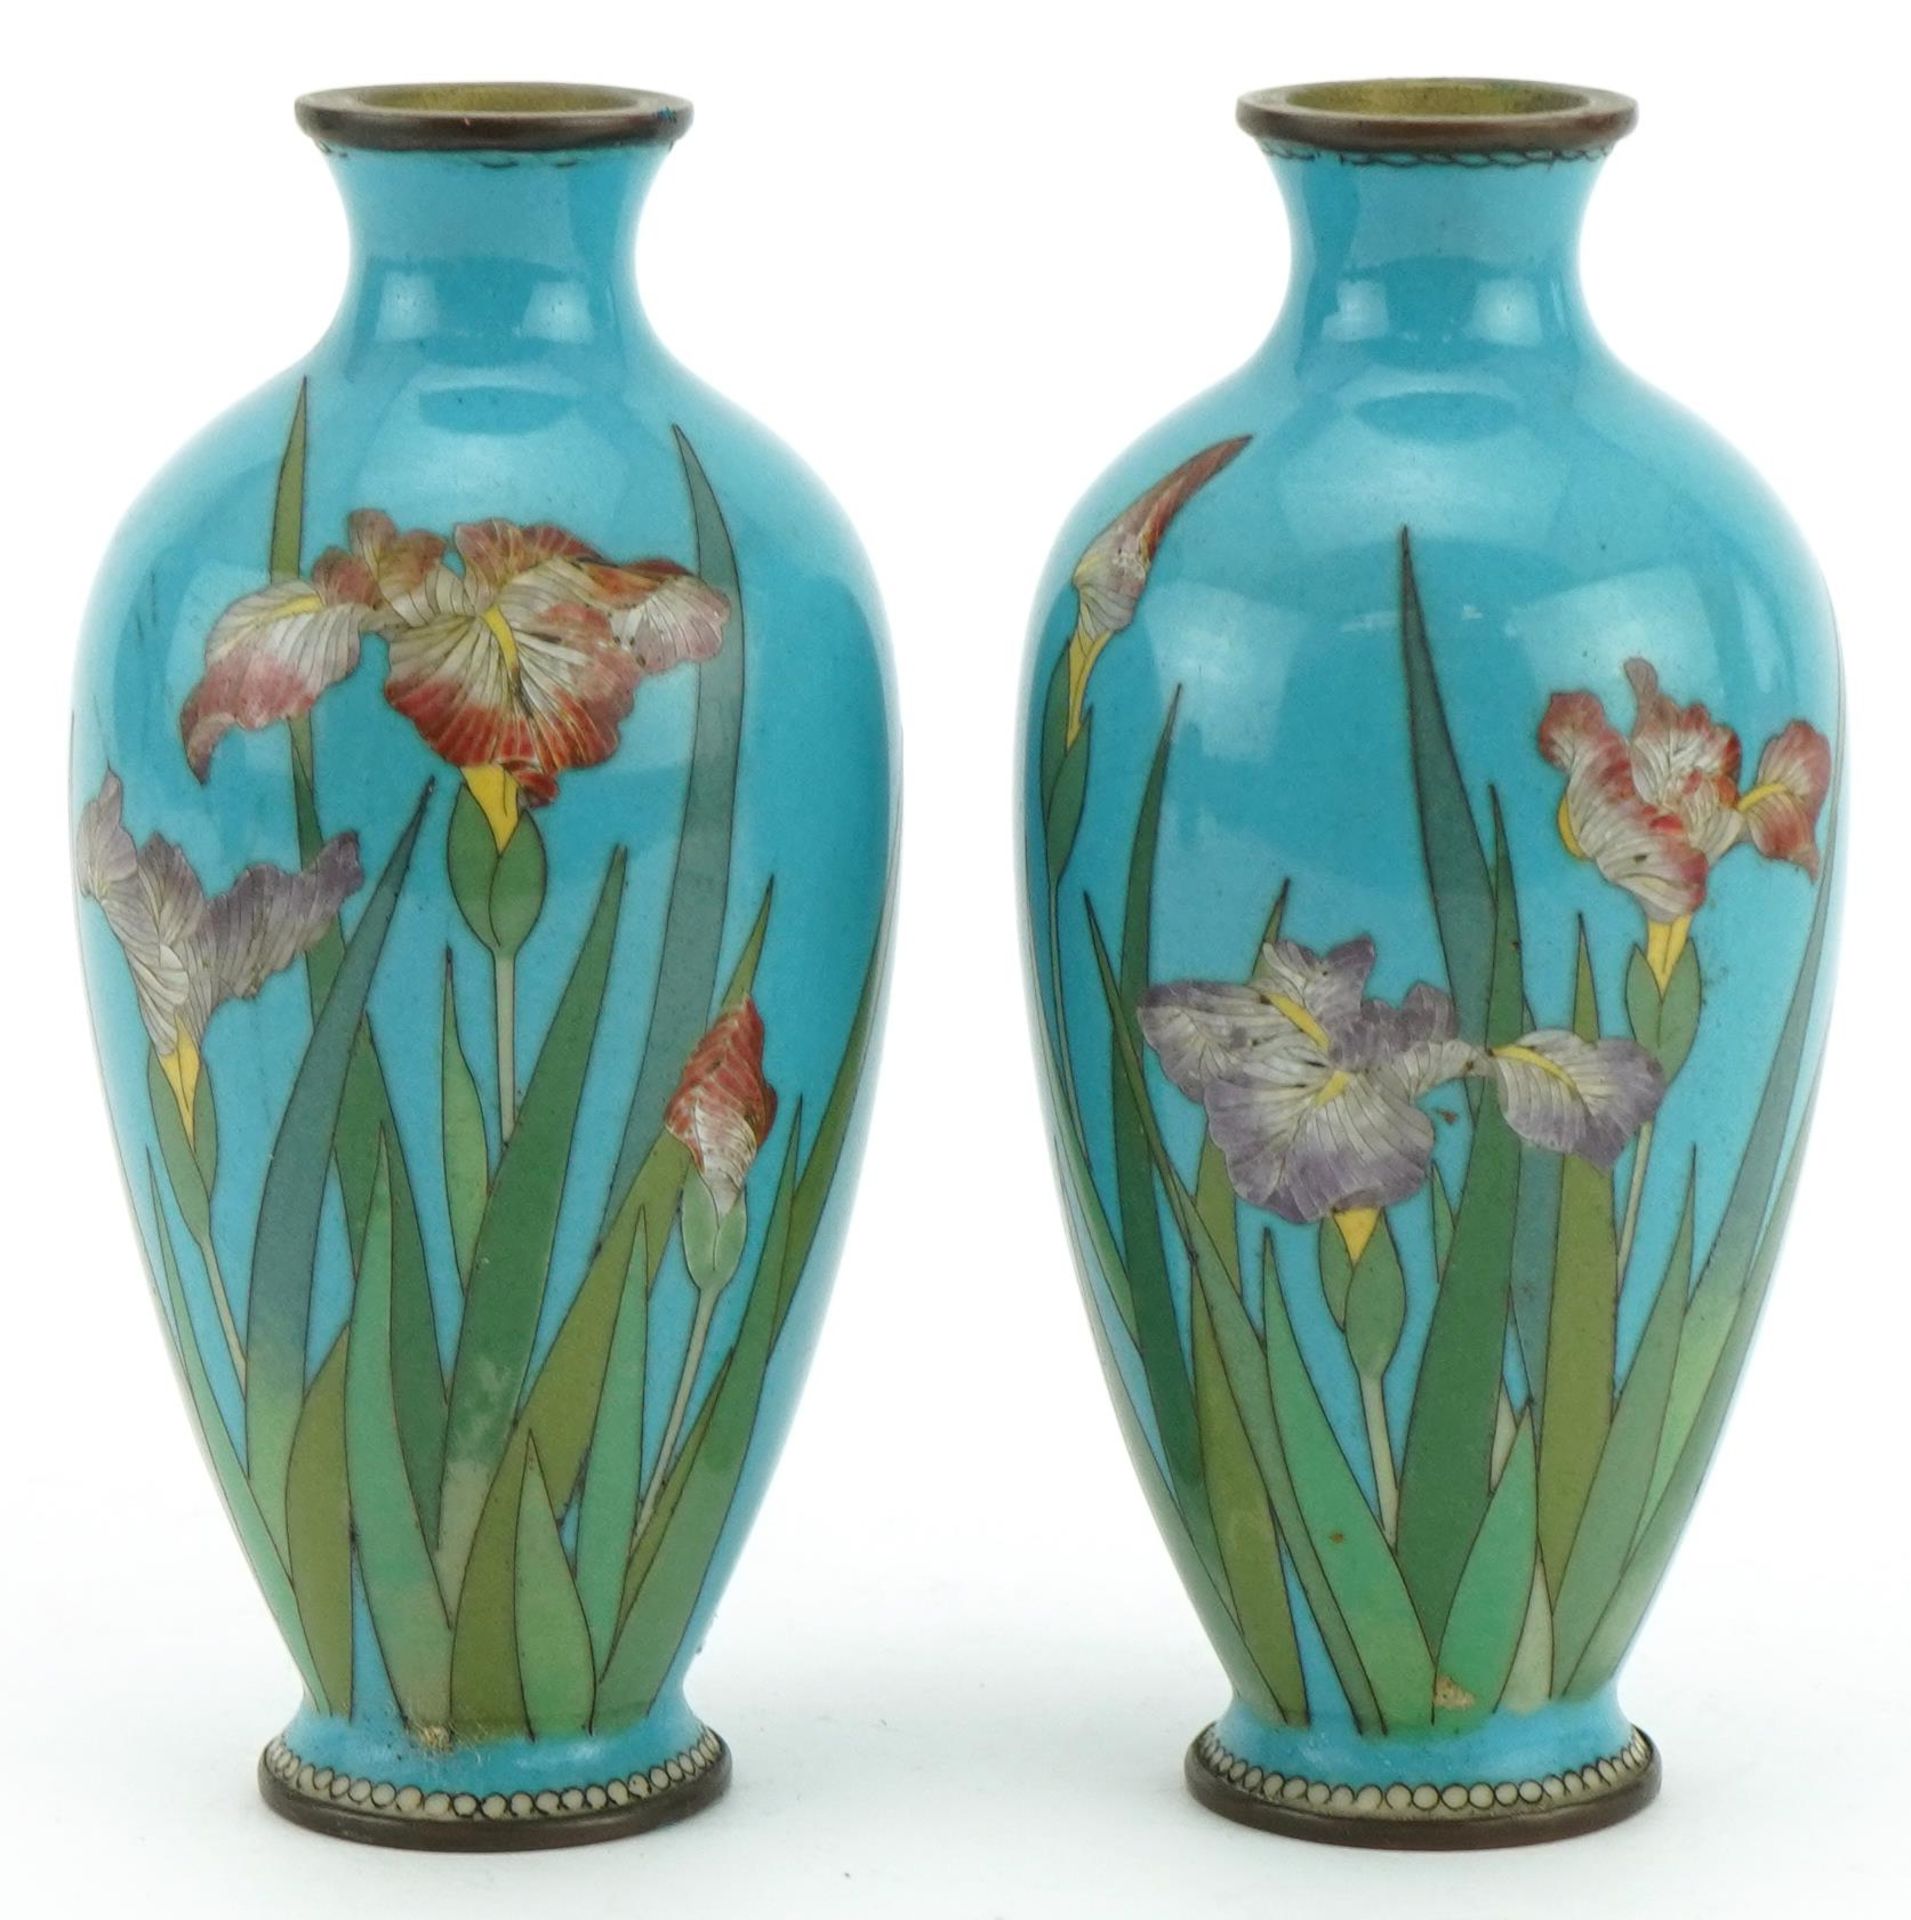 Pair of Japanese cloisonne vases enamelled with flowers, each 12cm high : For further information on